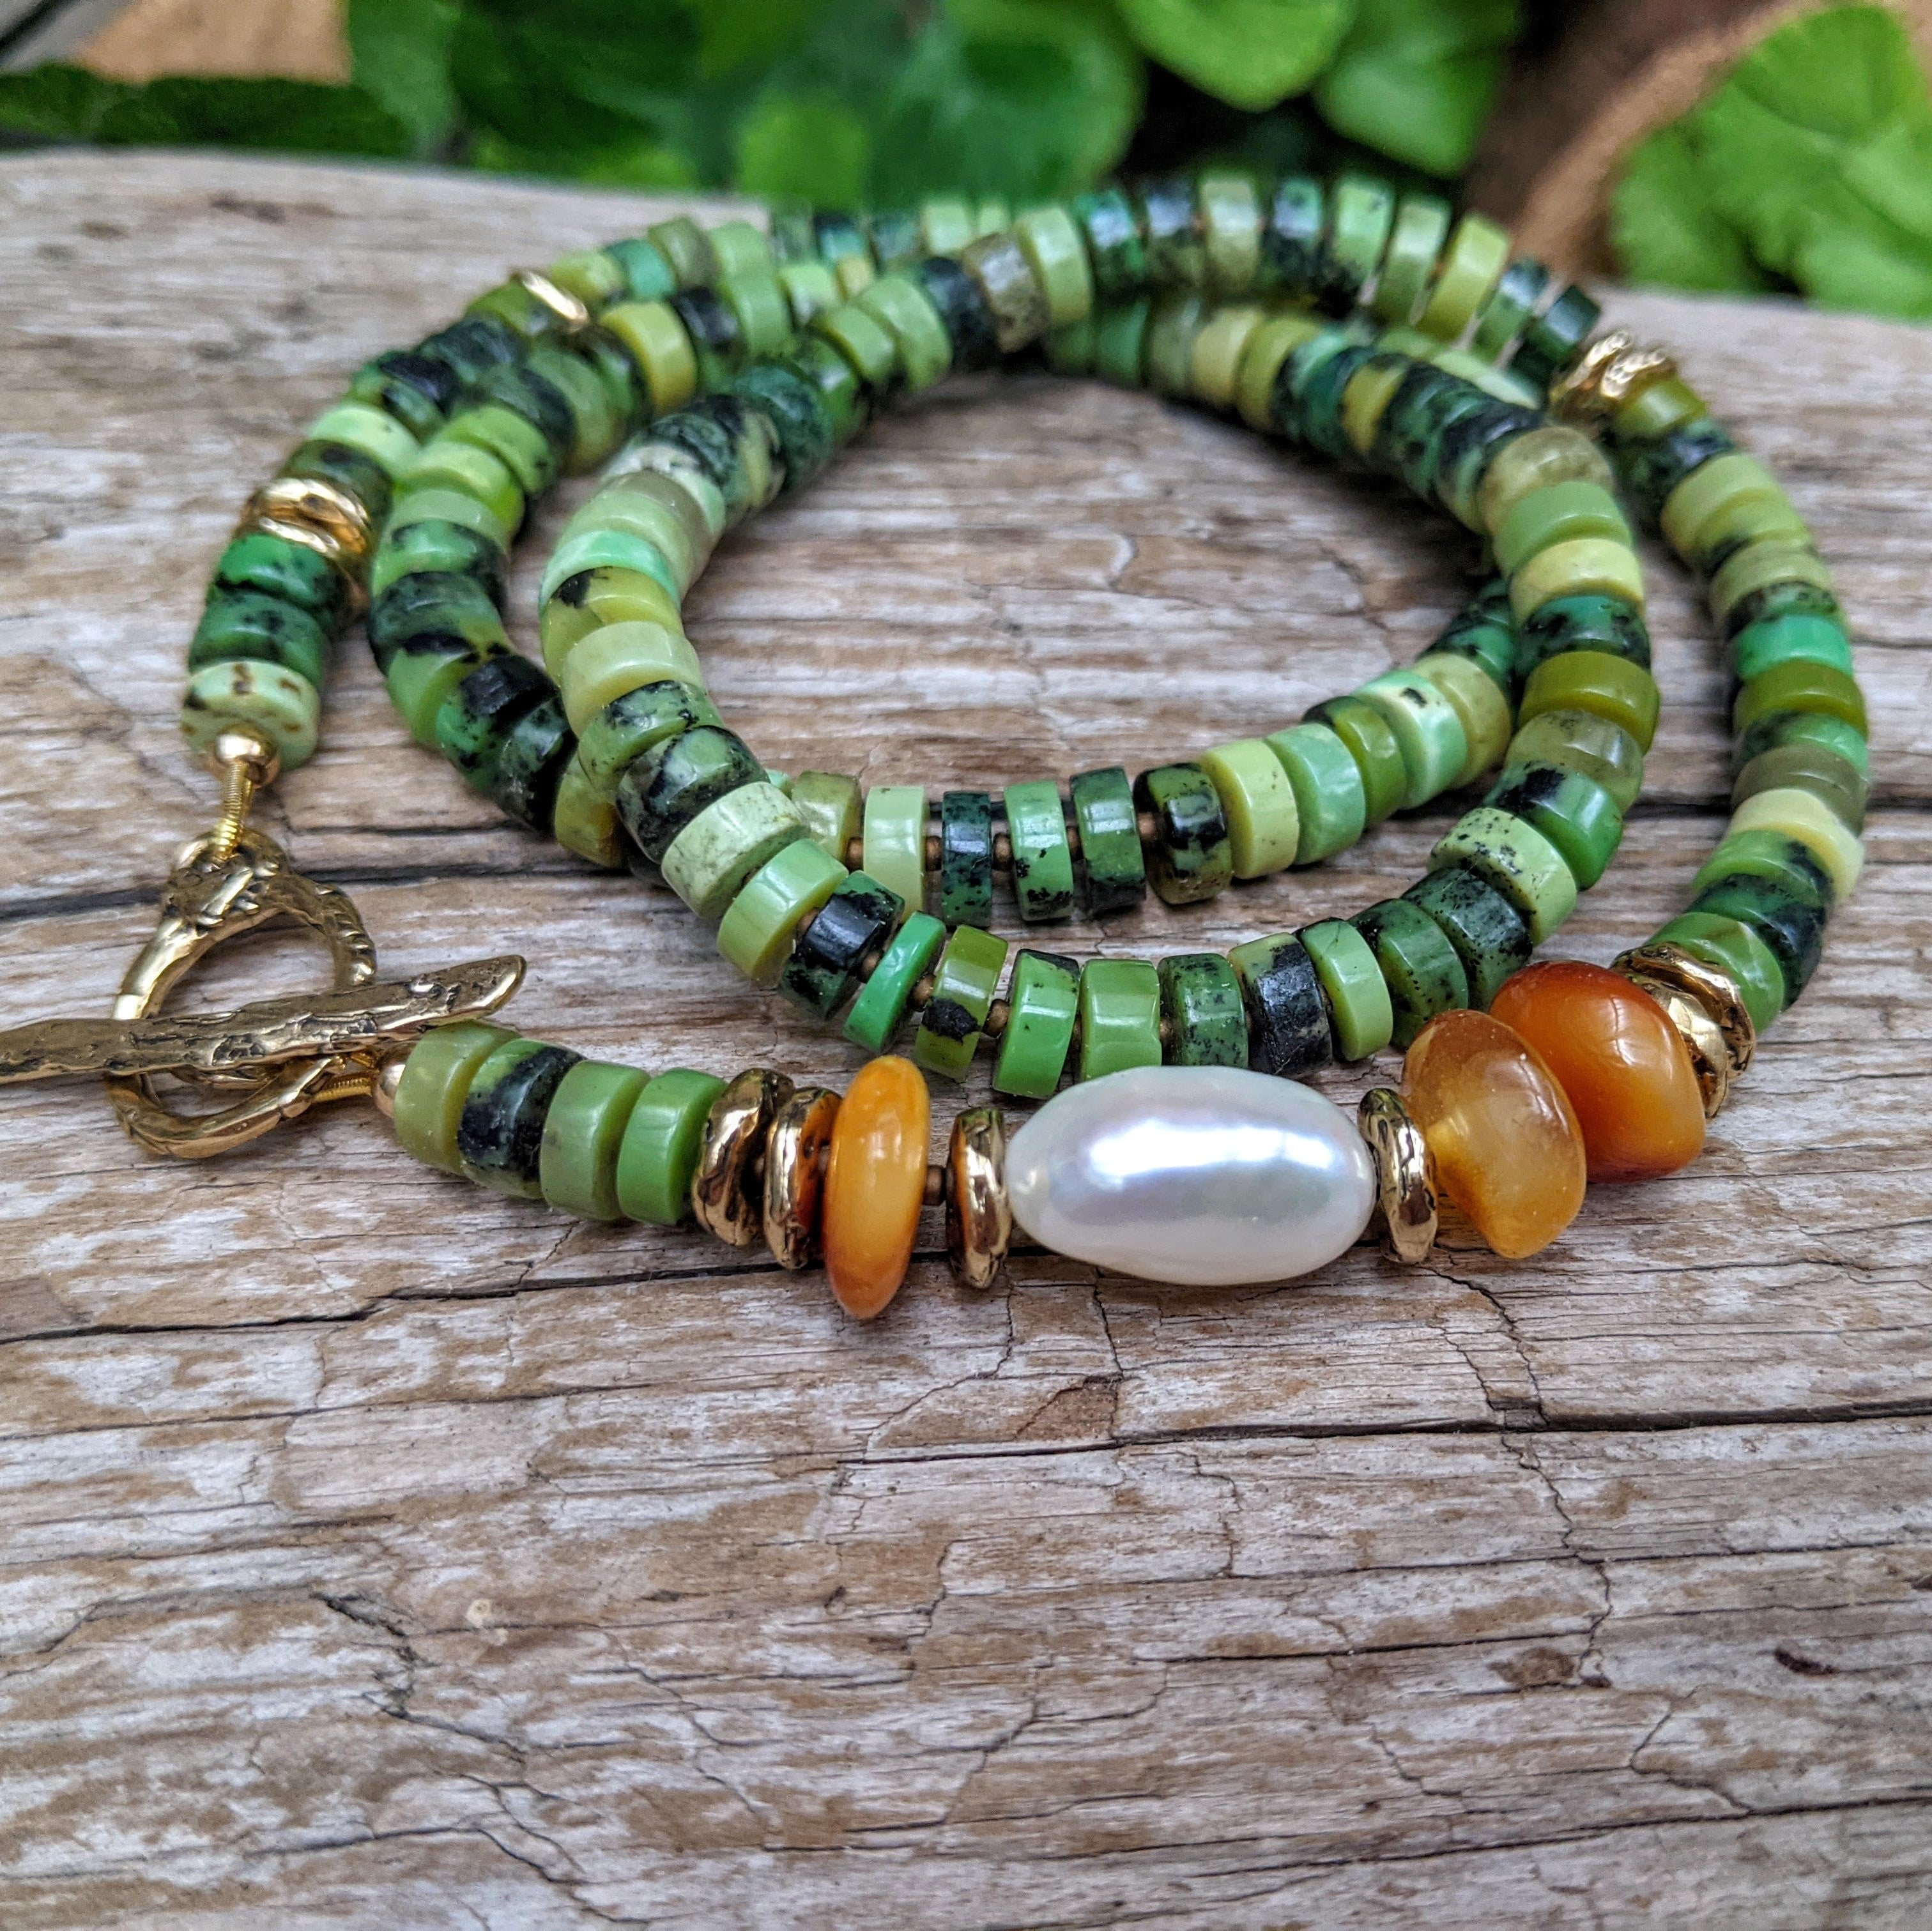 Forest green chrysoprase necklace with Baltic amber & fresh water pearl. Artisan rustic necklace handcrafted by Aurora Creative Jewellery.